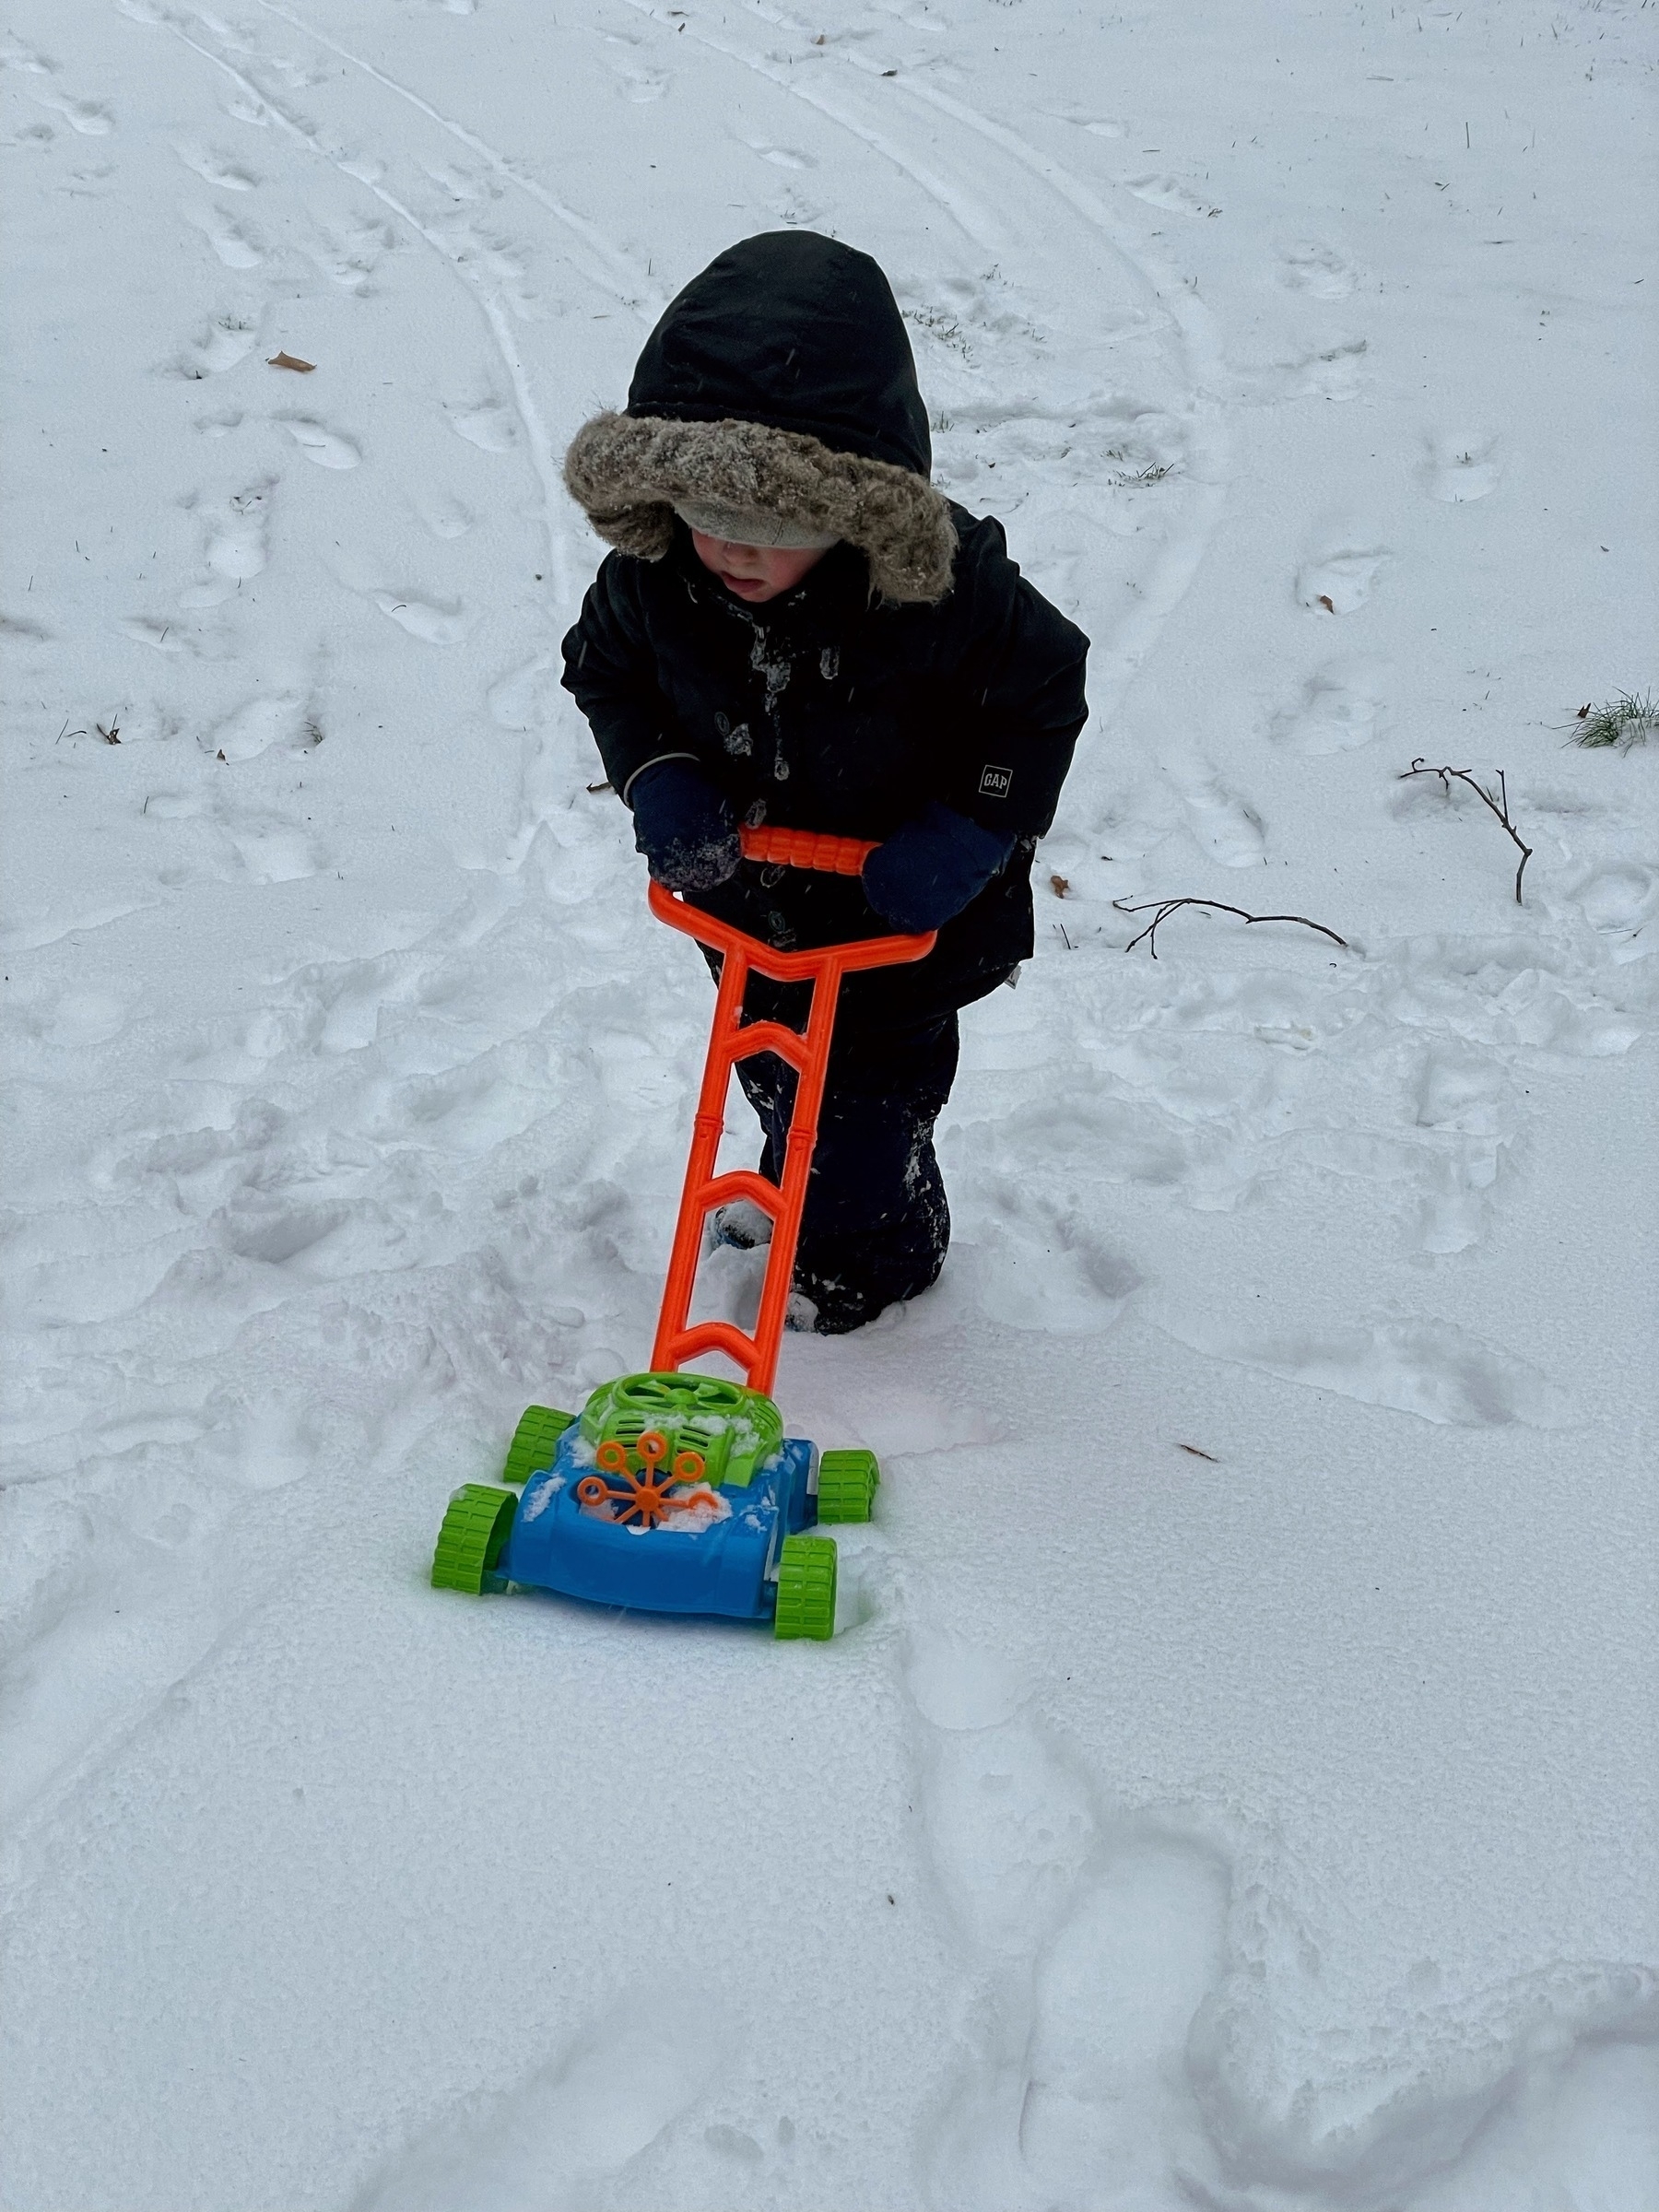 Child with a toy lawnmower in the snow